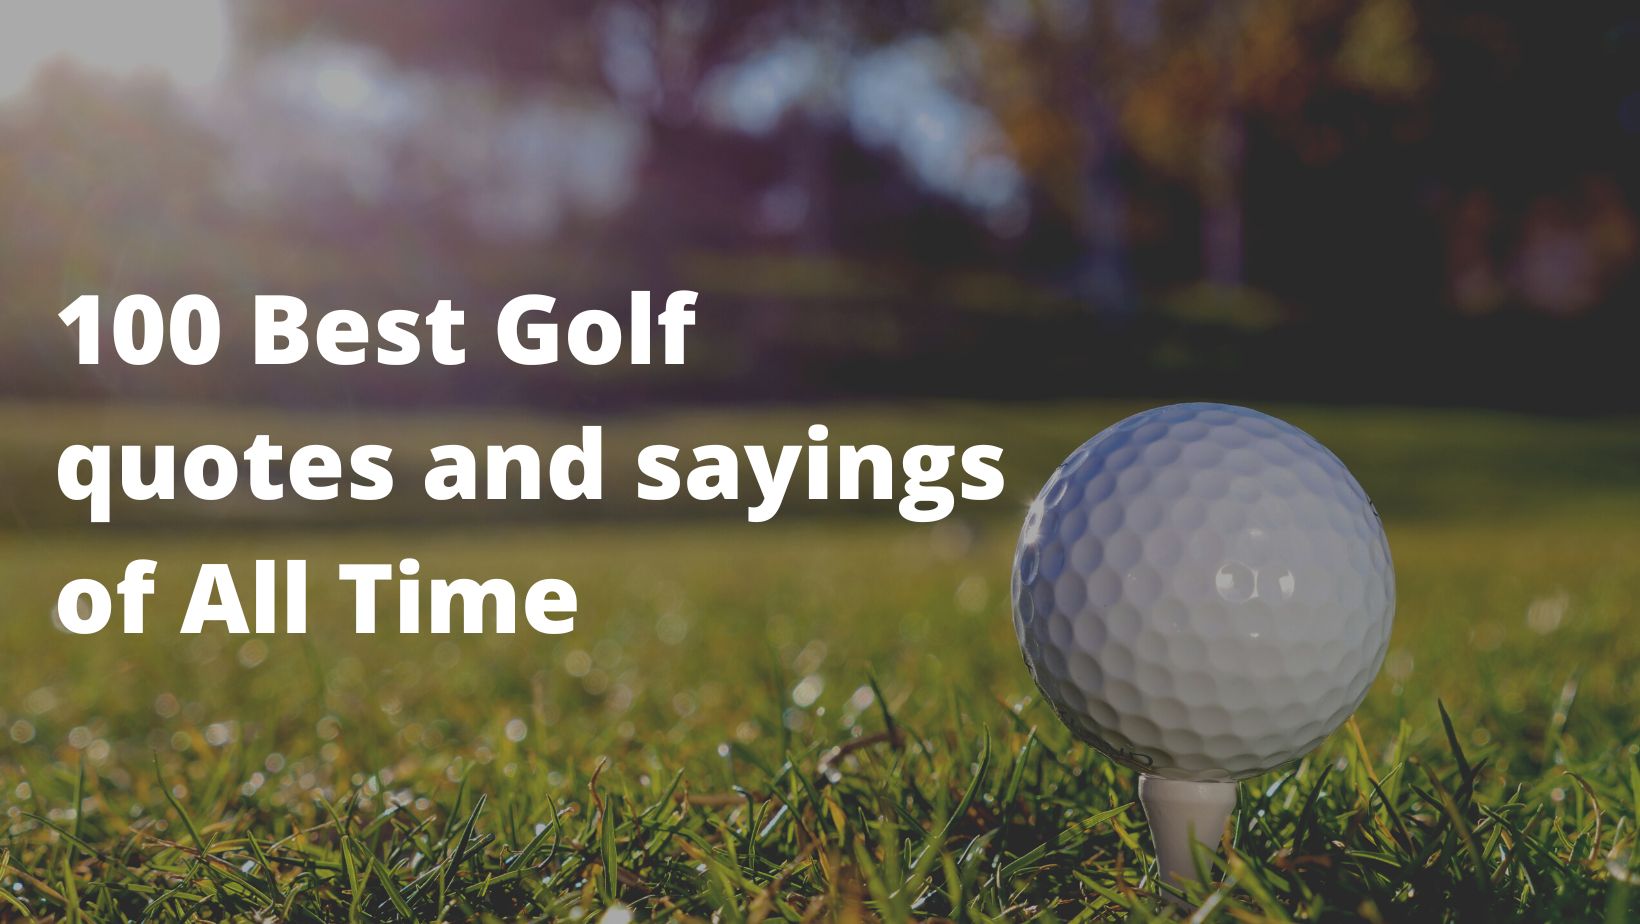 Golf Quotes Cover